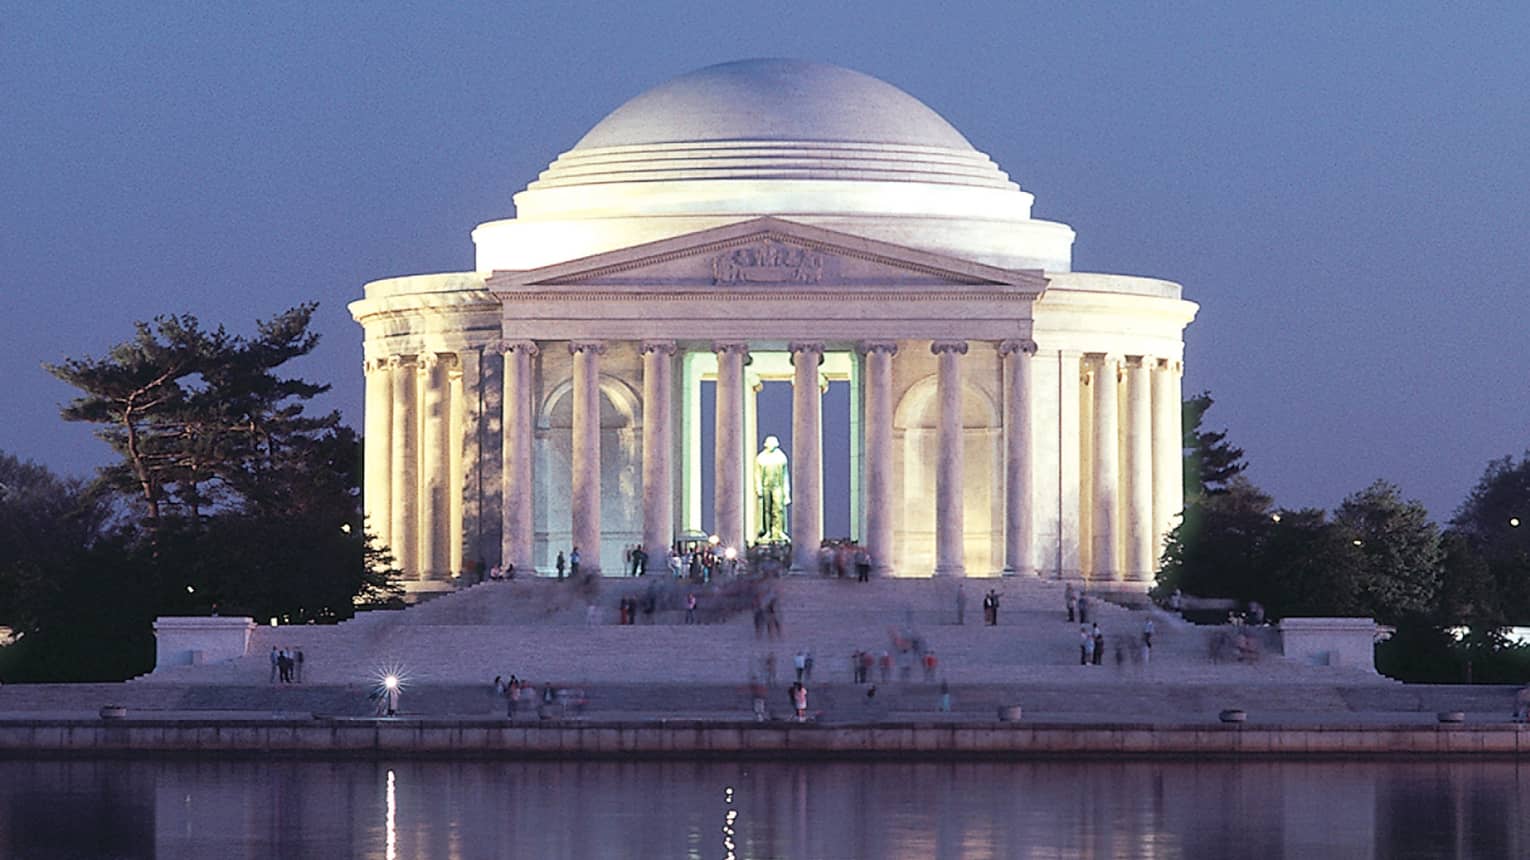 A large historical monument of white pillars and a large dome next to water.